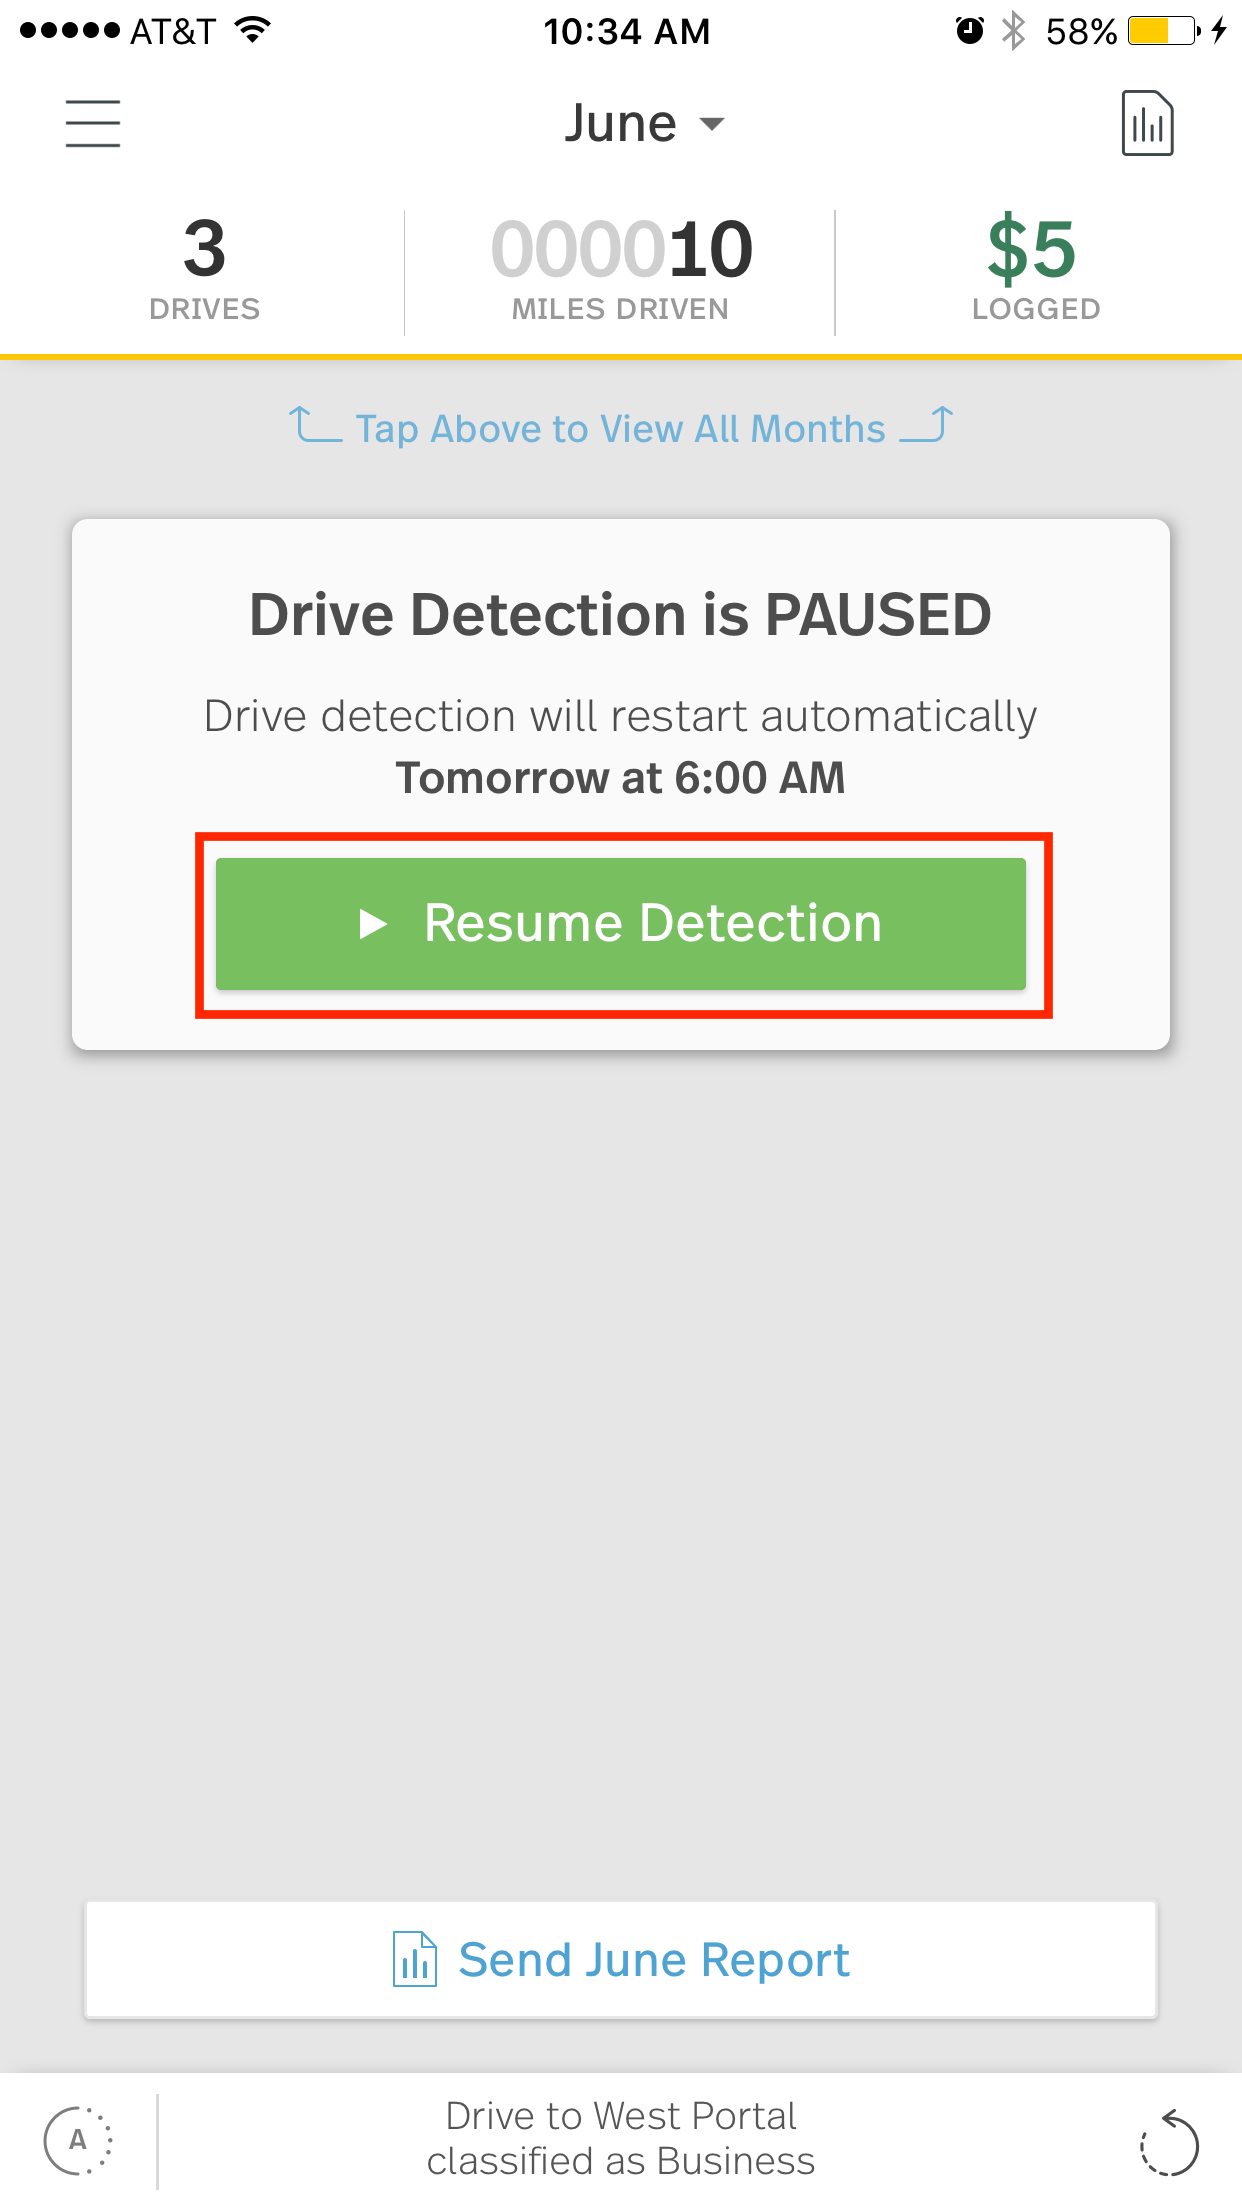 This image shows the MileIQ mobile app with drive detection paused. The resume detection button is highlighted.